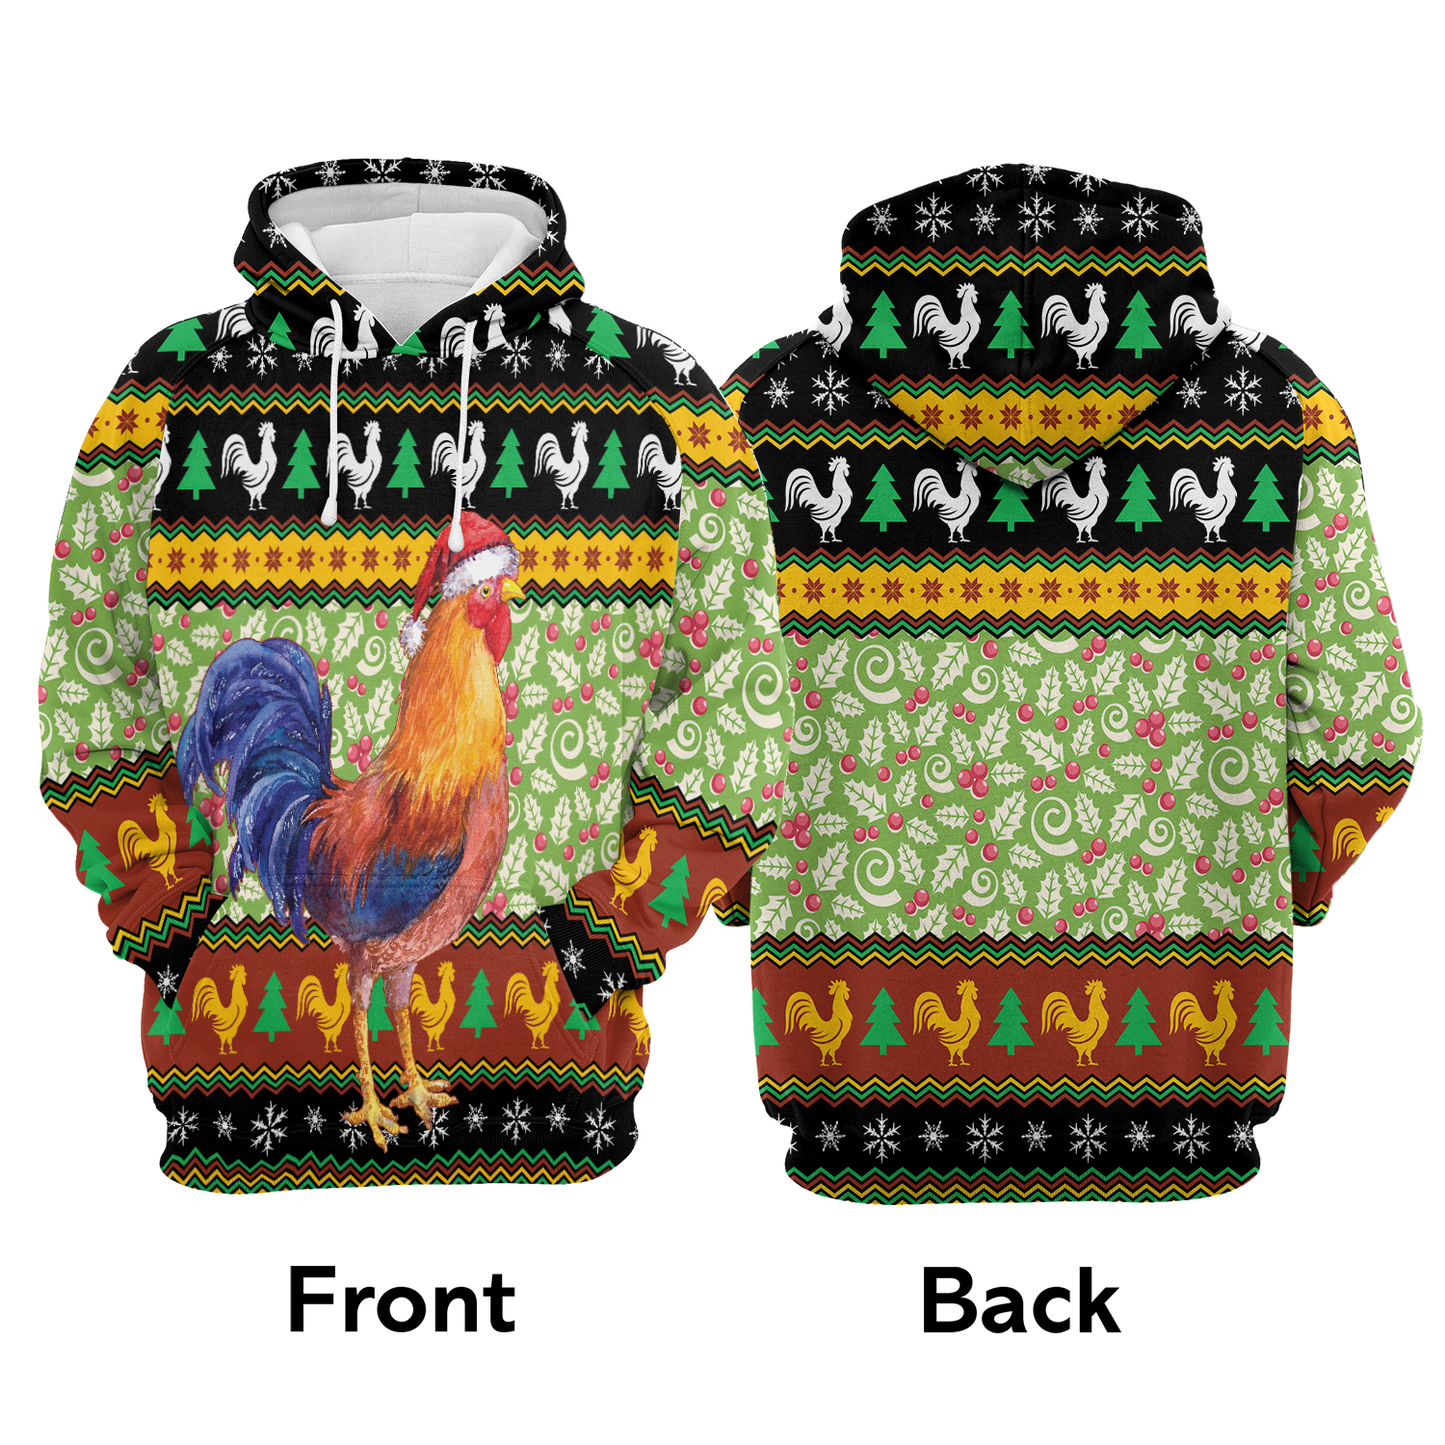 Chicken Cluck-ry All Over Print Unisex Hoodie